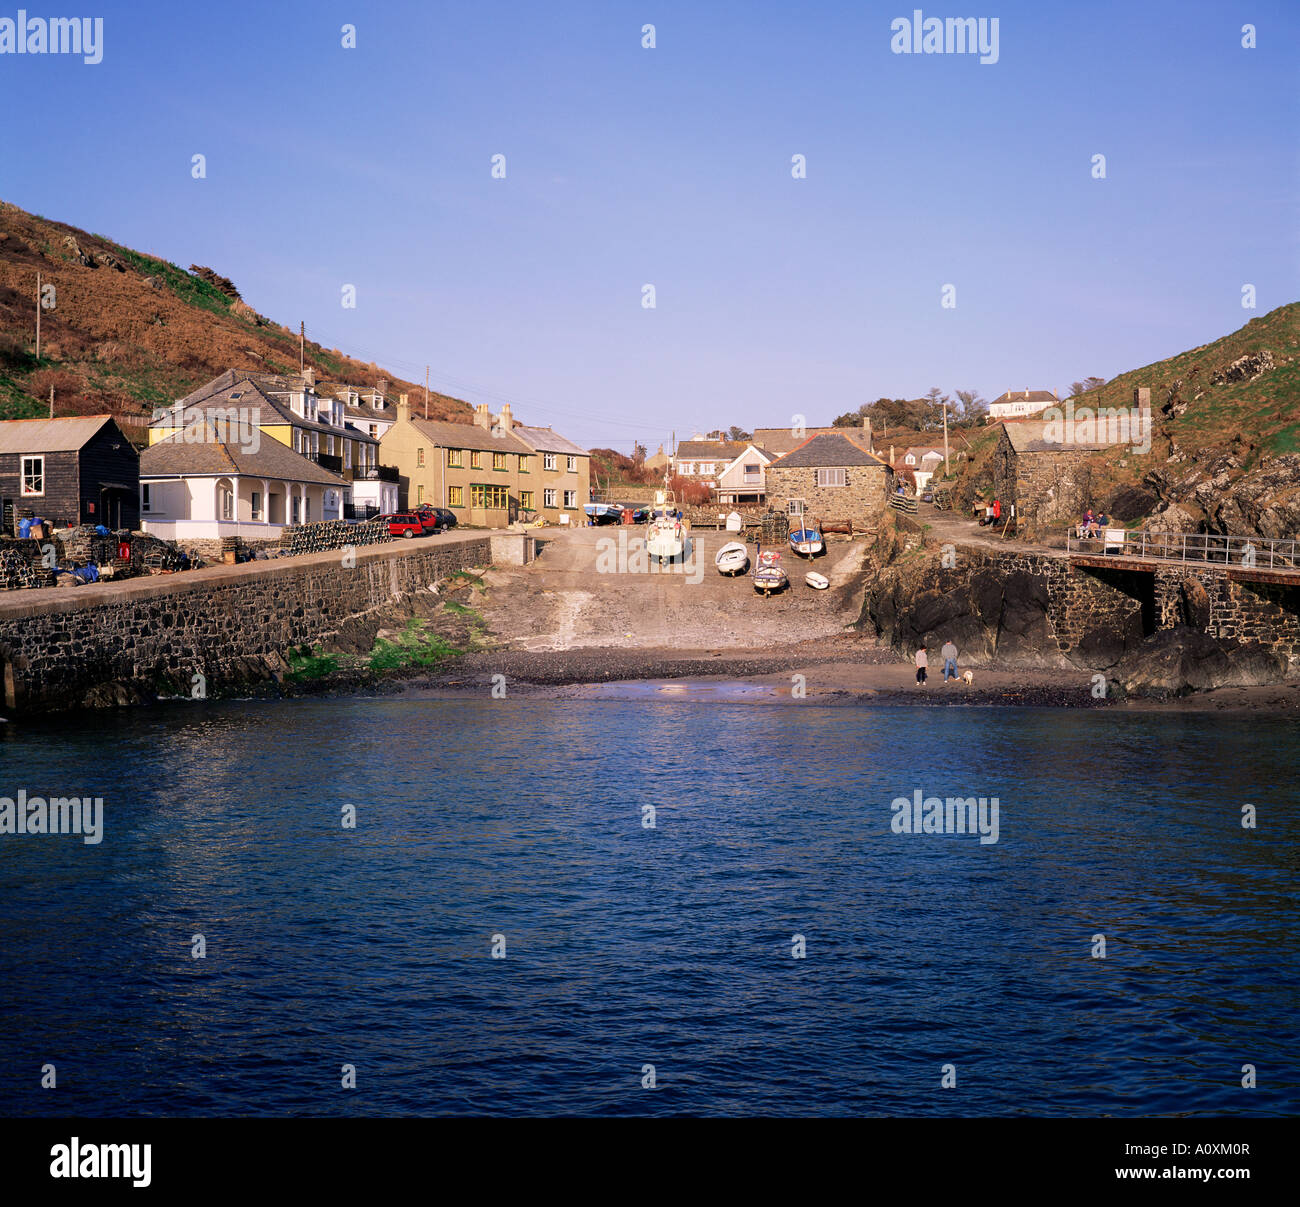 Cornwall Angleterre Mullion Cove Royaume Uni Europe Banque D'Images